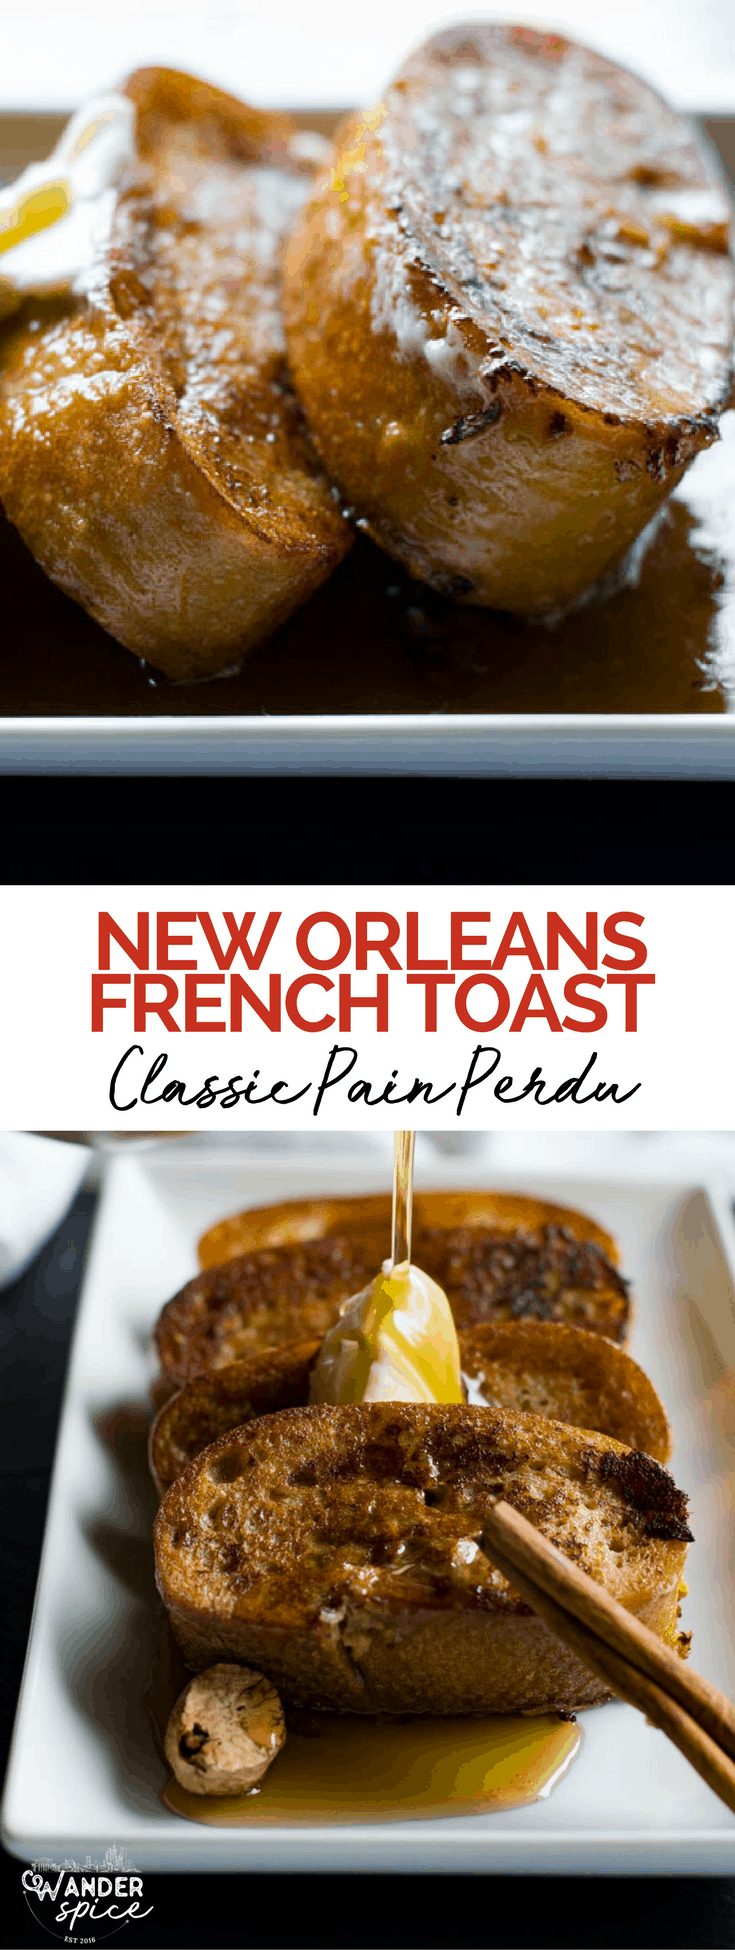 Best French Toast Recipe - Classic French Toast from New Orleans. Pain Perdu #FrenchToast